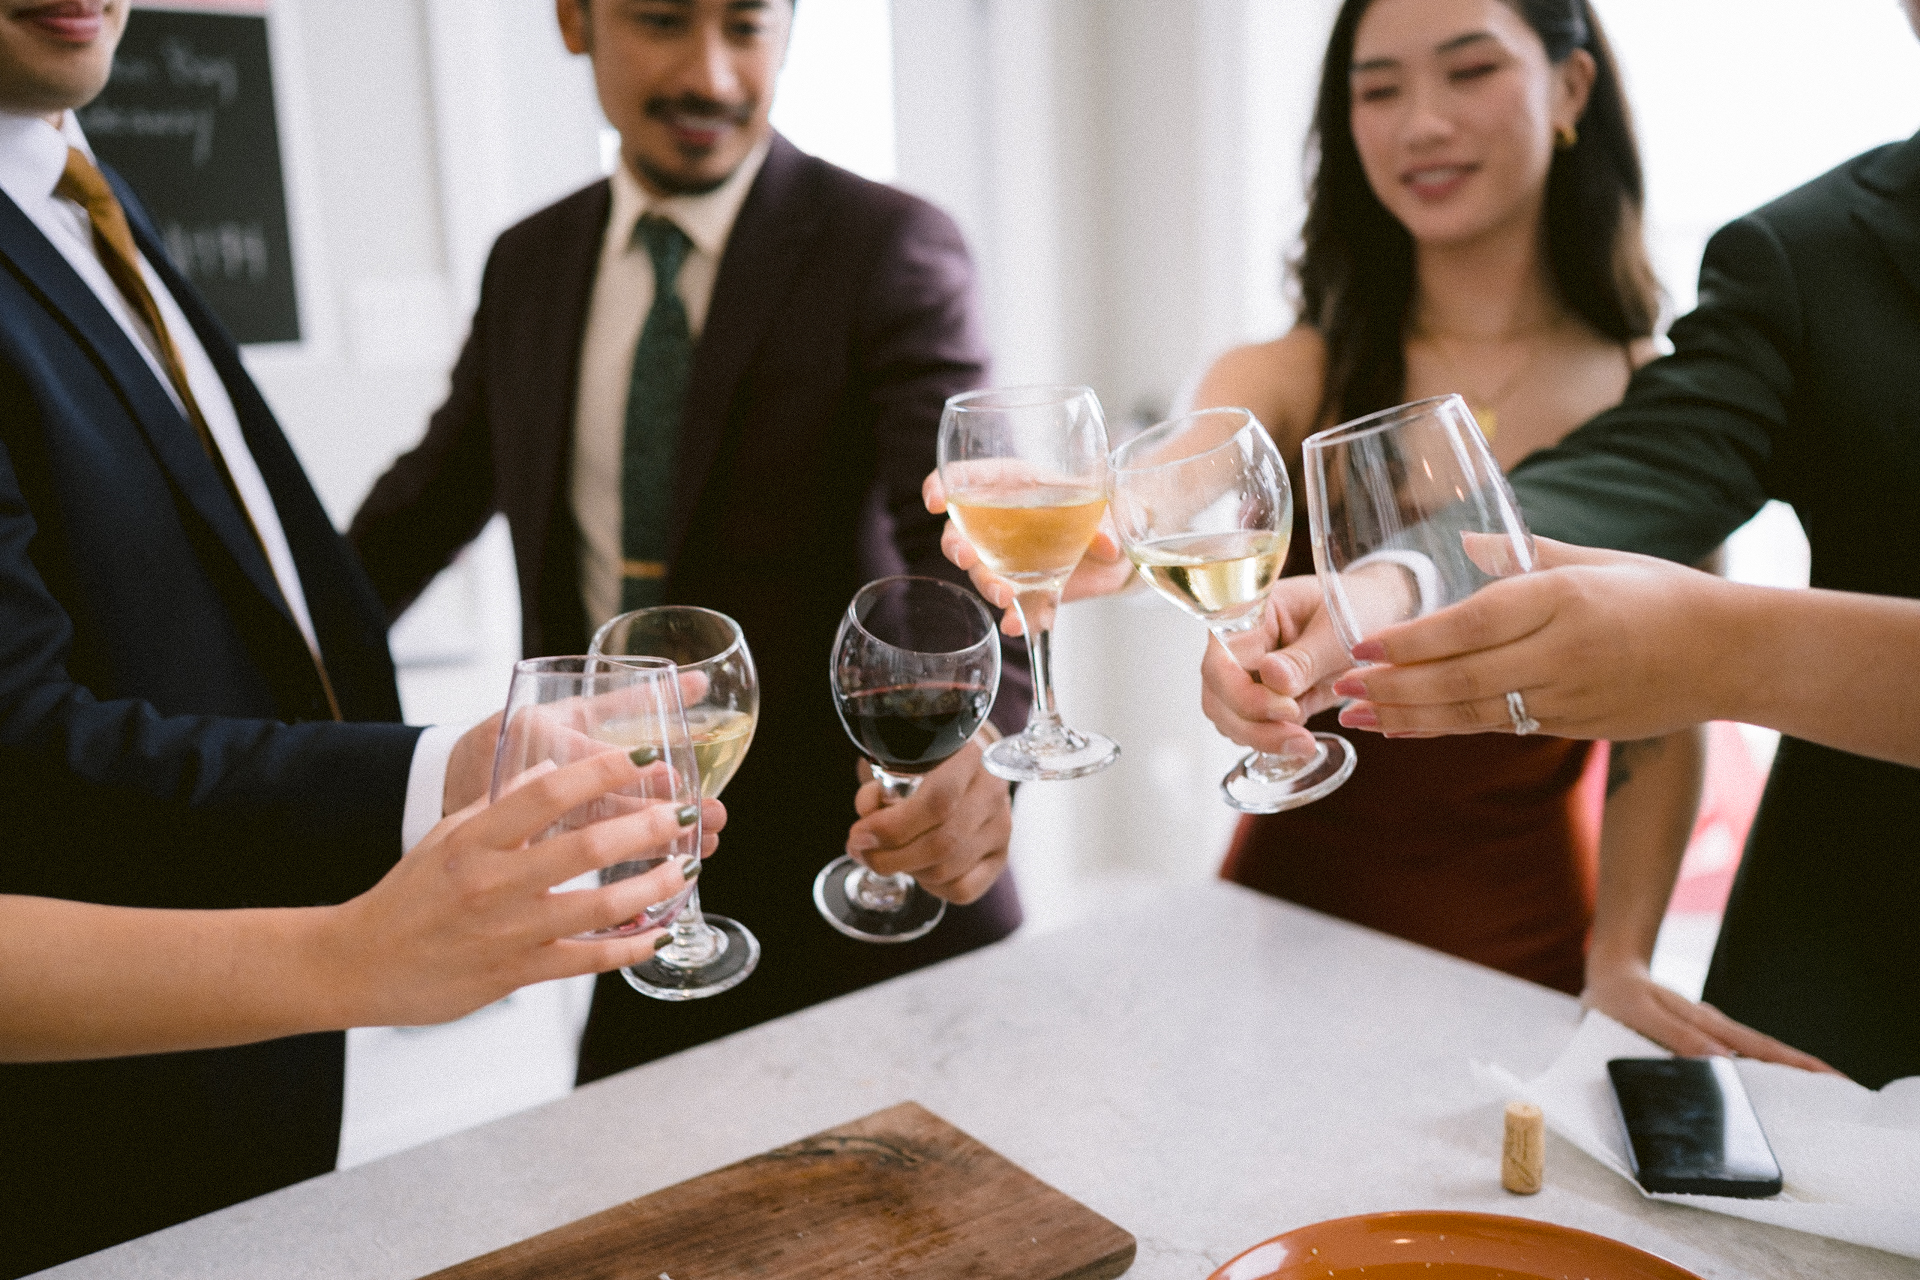 Group of people toasting with wine glasses.